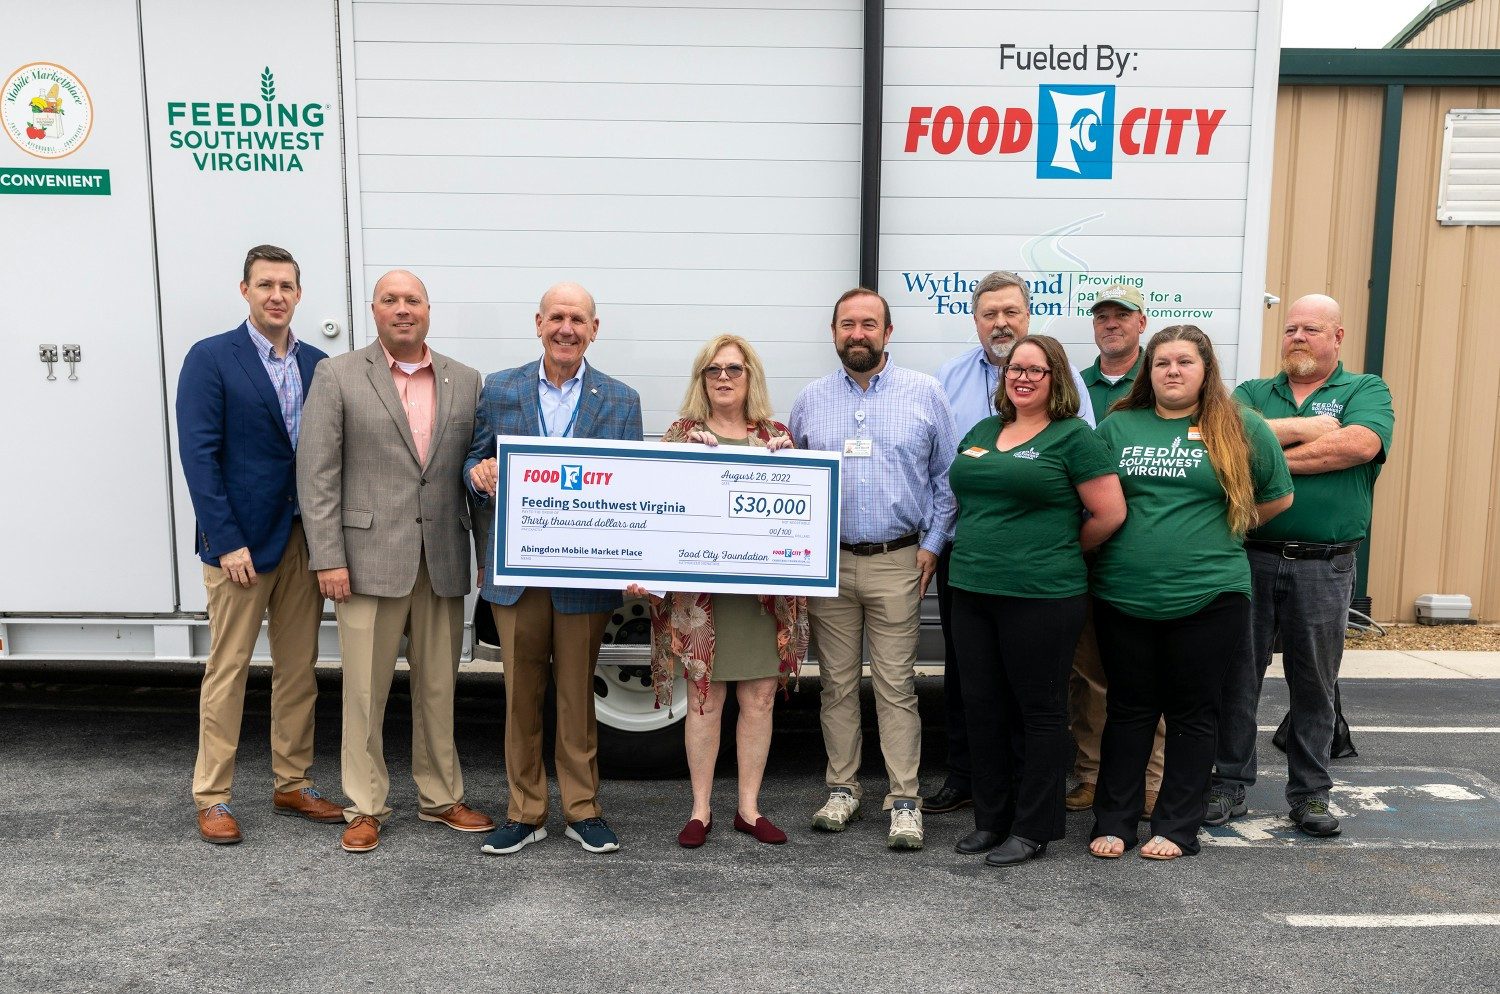 Food City is proud to be a long-time supporter of Feeding Southwest Virginia, and their Mobile Marketplace initiative.